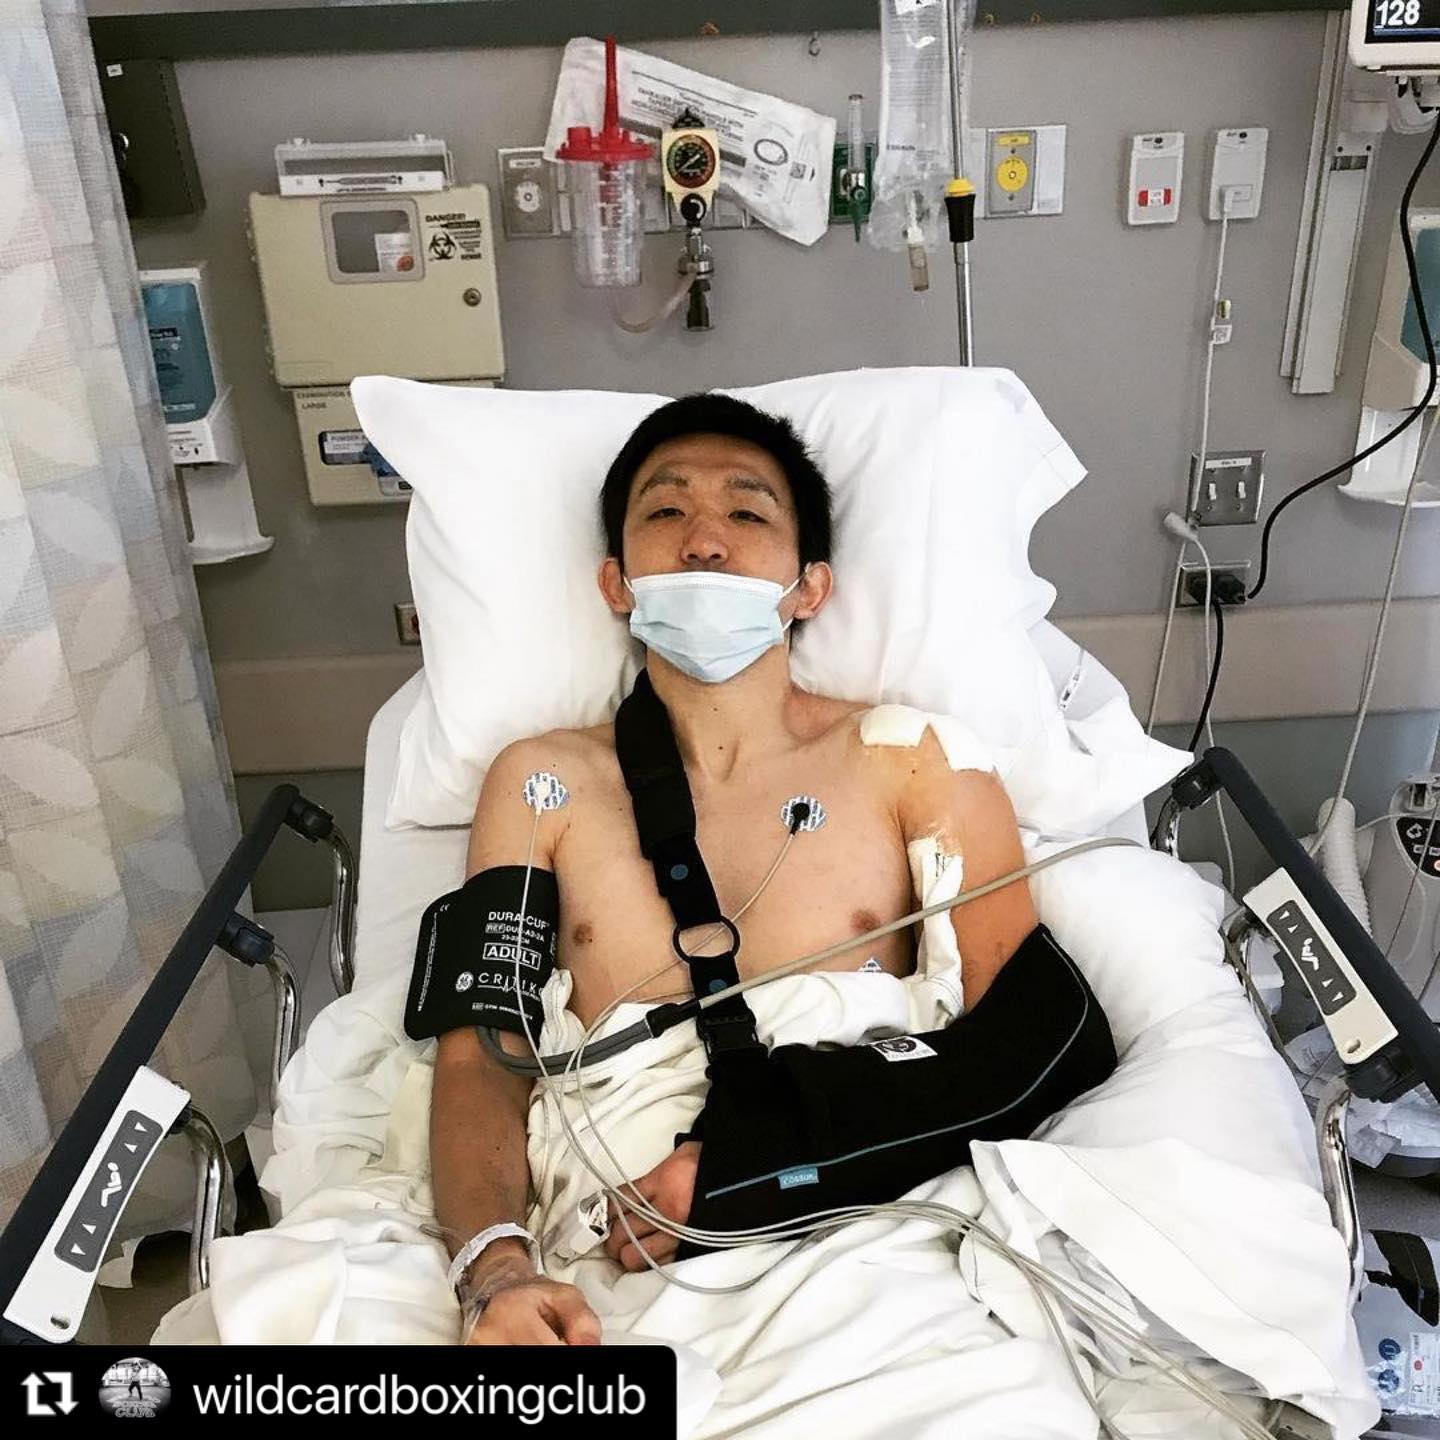 @wildcardboxingclub・・・
Our friend and pro boxer Gaku’s GoFundMe link is still in our Instagram profile and @freddieroach ‘s Instagram profile. Here is an update on his progress … stay strong, Gaku!  Keep your spirits up!  @freddieroach … @yuki52s
・・・
*Update on Gaku*
First thank you for your continued support! 

Gaku was able to undergo an arthroscopic surgery on his left shoulder on September 8th, it took more than 2.5 hours, but his doctor said the surgery went very well. His post-op process is going well too.

Unfortunately, his debt hasn’t been reduced yet, and the fund so far couldn’t cover the total amount of surgery cost and associated expenses. Additionally, the post surgery recovery process would take about six months, with further treatments for neck and lower back pain other than mental health issues which are still problematic.

Therefore, we thank you for your continued support, every donation is appreciated no matter the amount, each and every one helps. If you can't make a donation, it would be great if you could share the fundraiser to help spread the word.[LINK IN MY BIO] 

If you don’t know what happened to him, please take a look at his full story on his GoFundMe page. [LINK IN MY BIO] 

Thanks!!


@WildCardBoxing1 @WCBstore @FreddieRoach @dc_thunder_boxing @pandamartz chuchster75 @zavalaernie